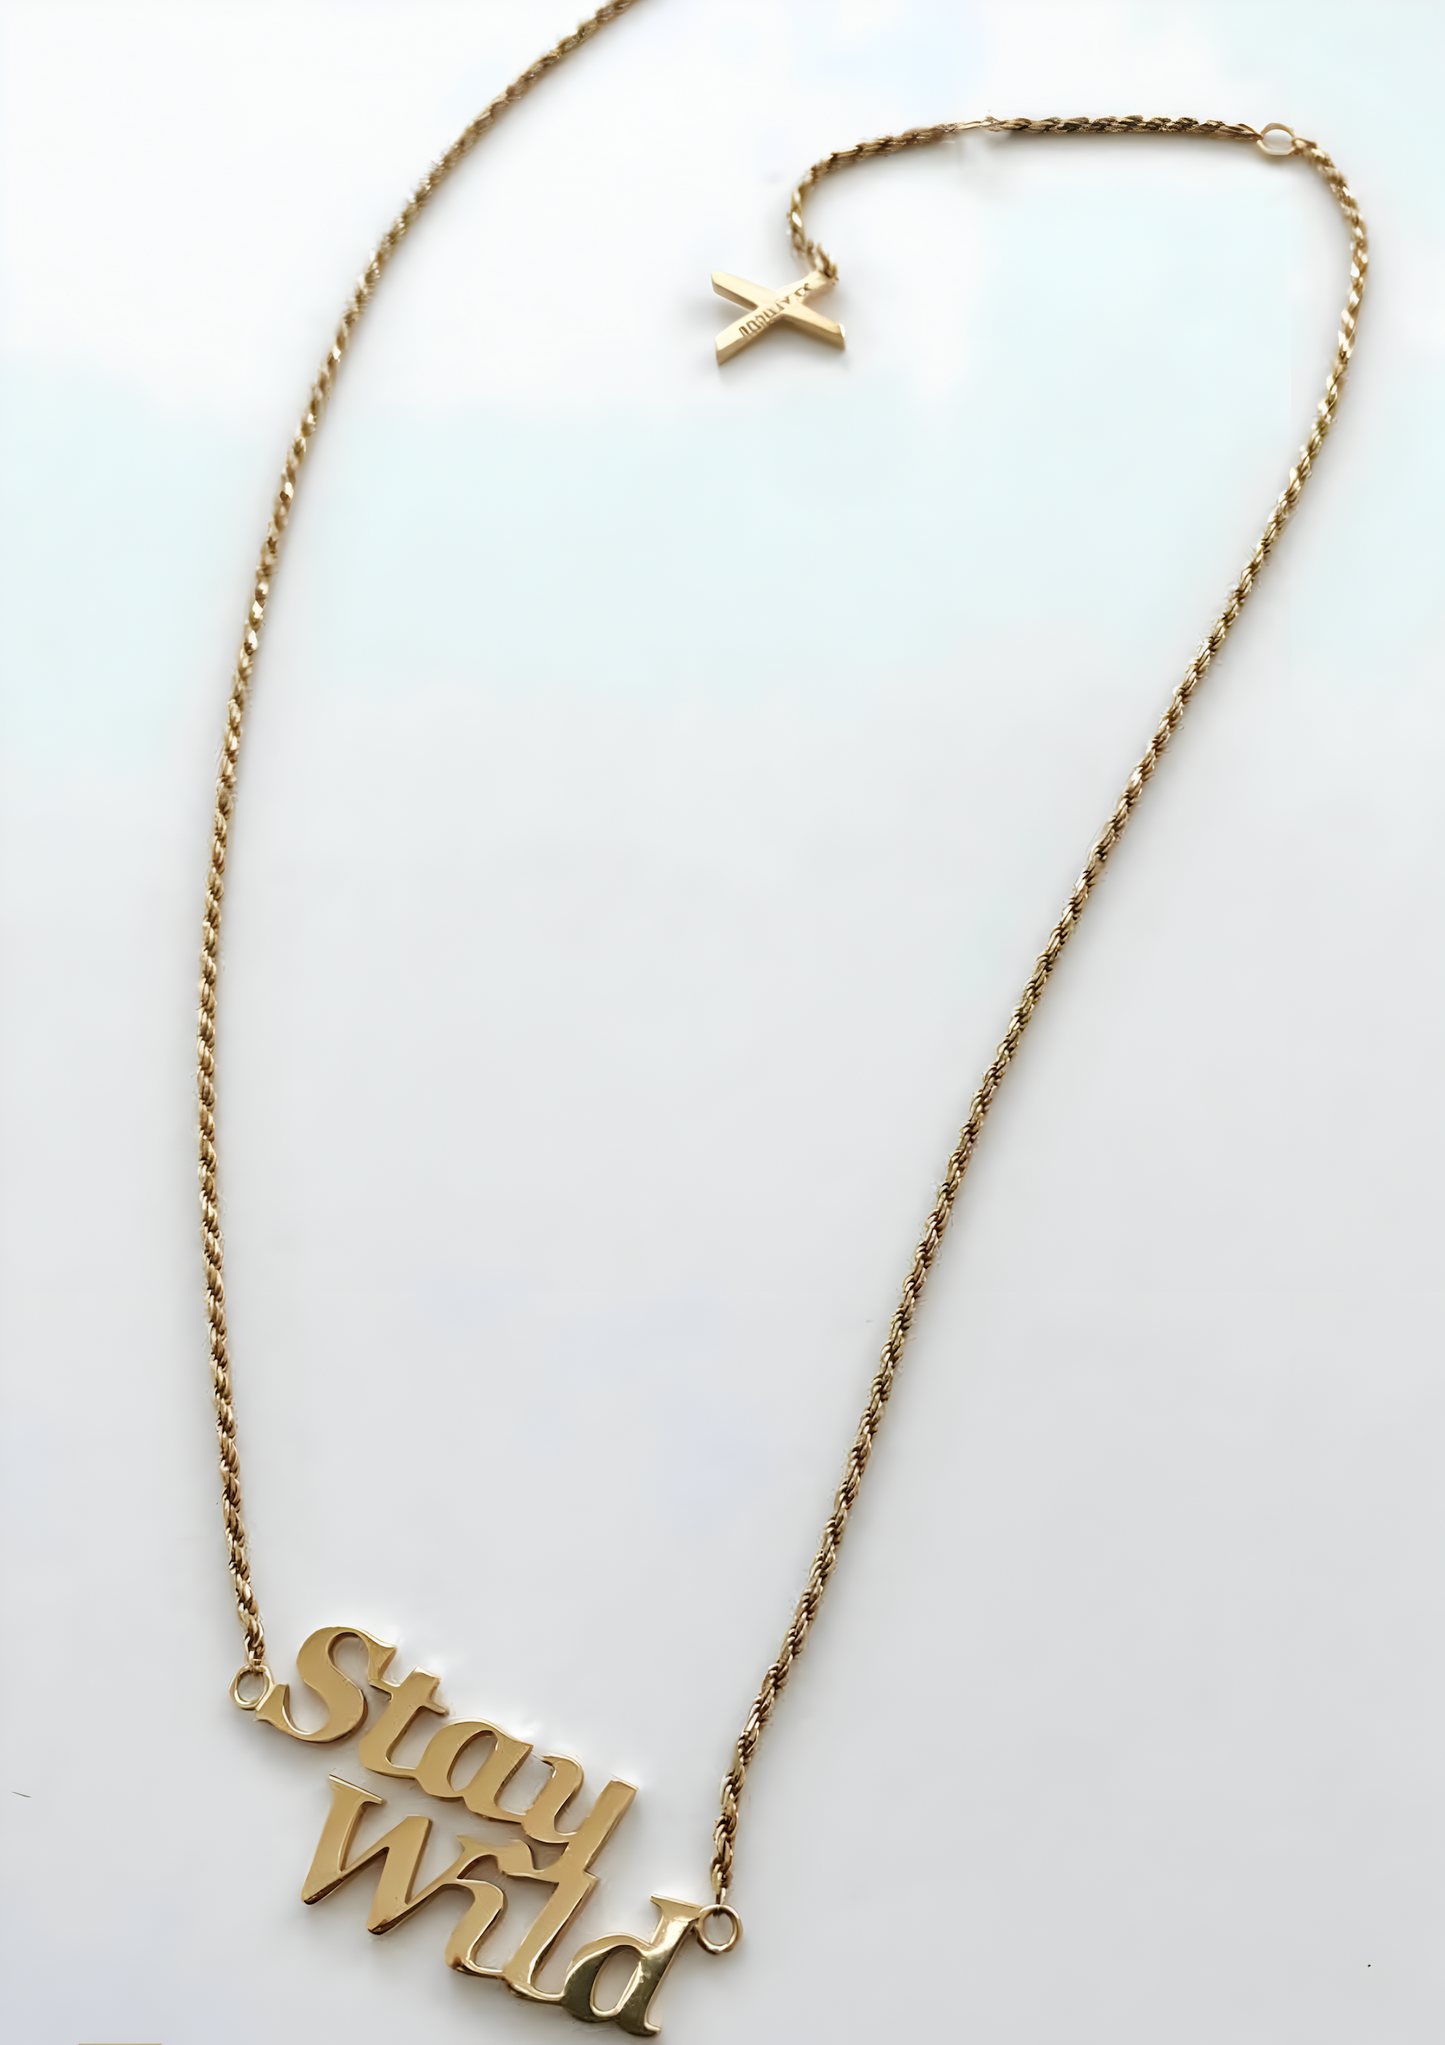 Stay Wild "Name" Necklace